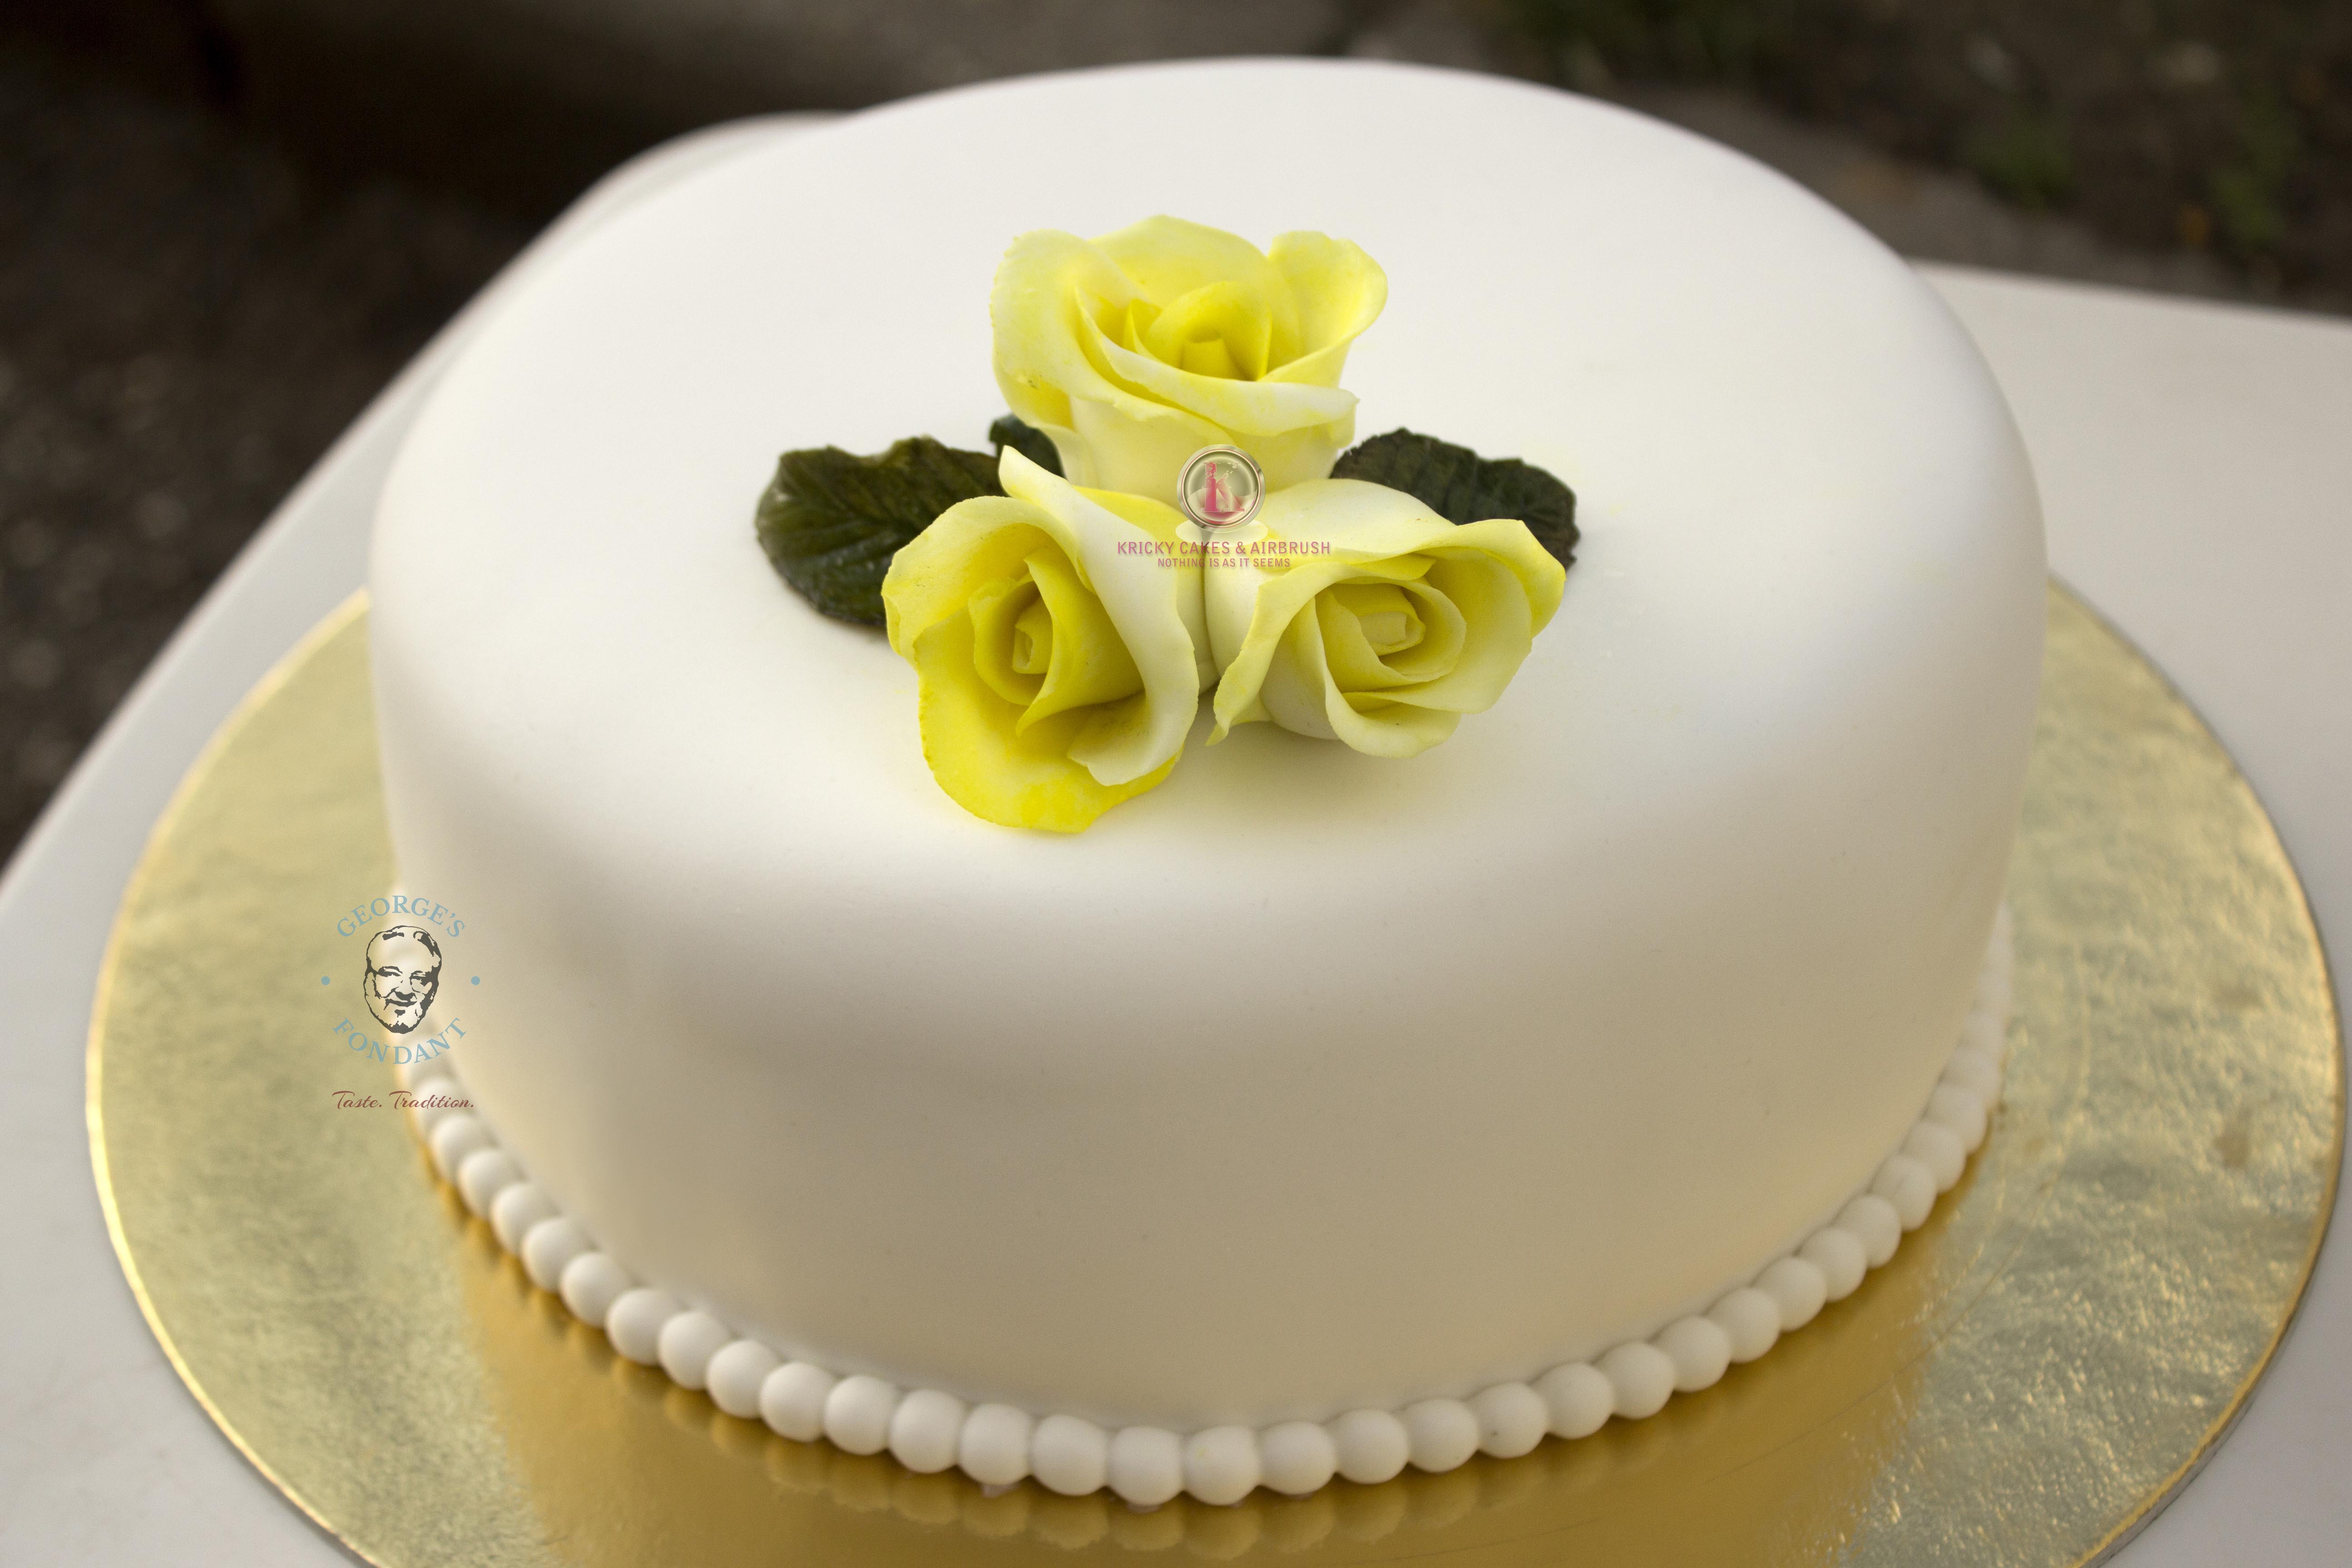 George's Fondant Classic White Cake with Yellow Rose